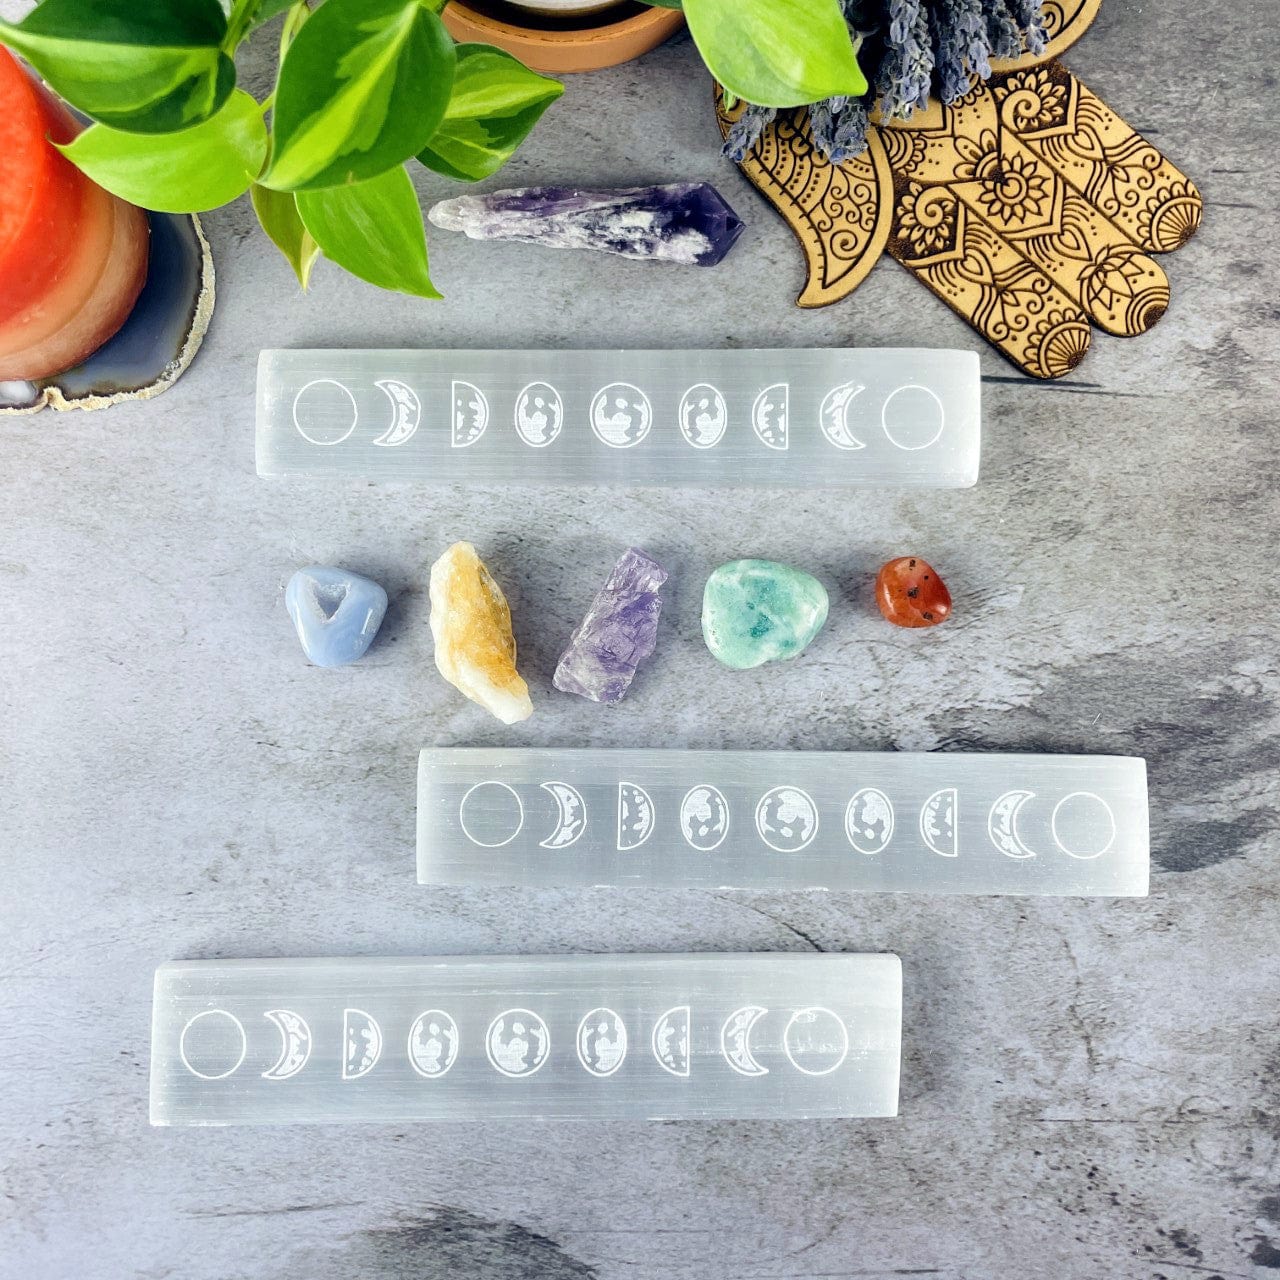 3 Selenite Charging Plates Engraved with Moon Phase Design with stones and other decor around